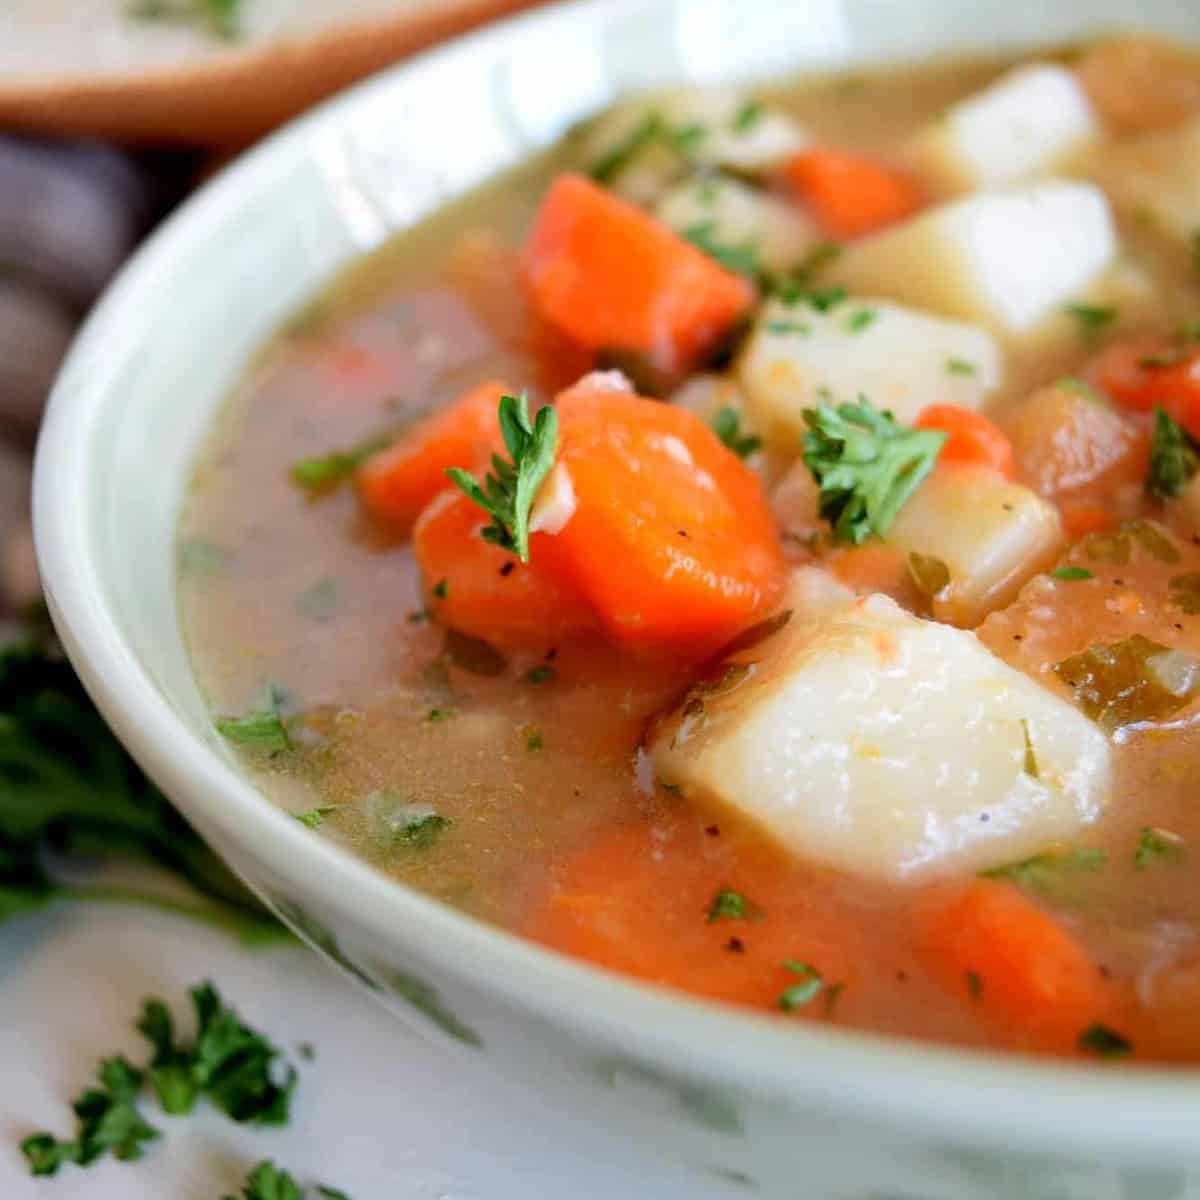  Earthy, rich, and savory, this soup is perfect for a cozy night in.